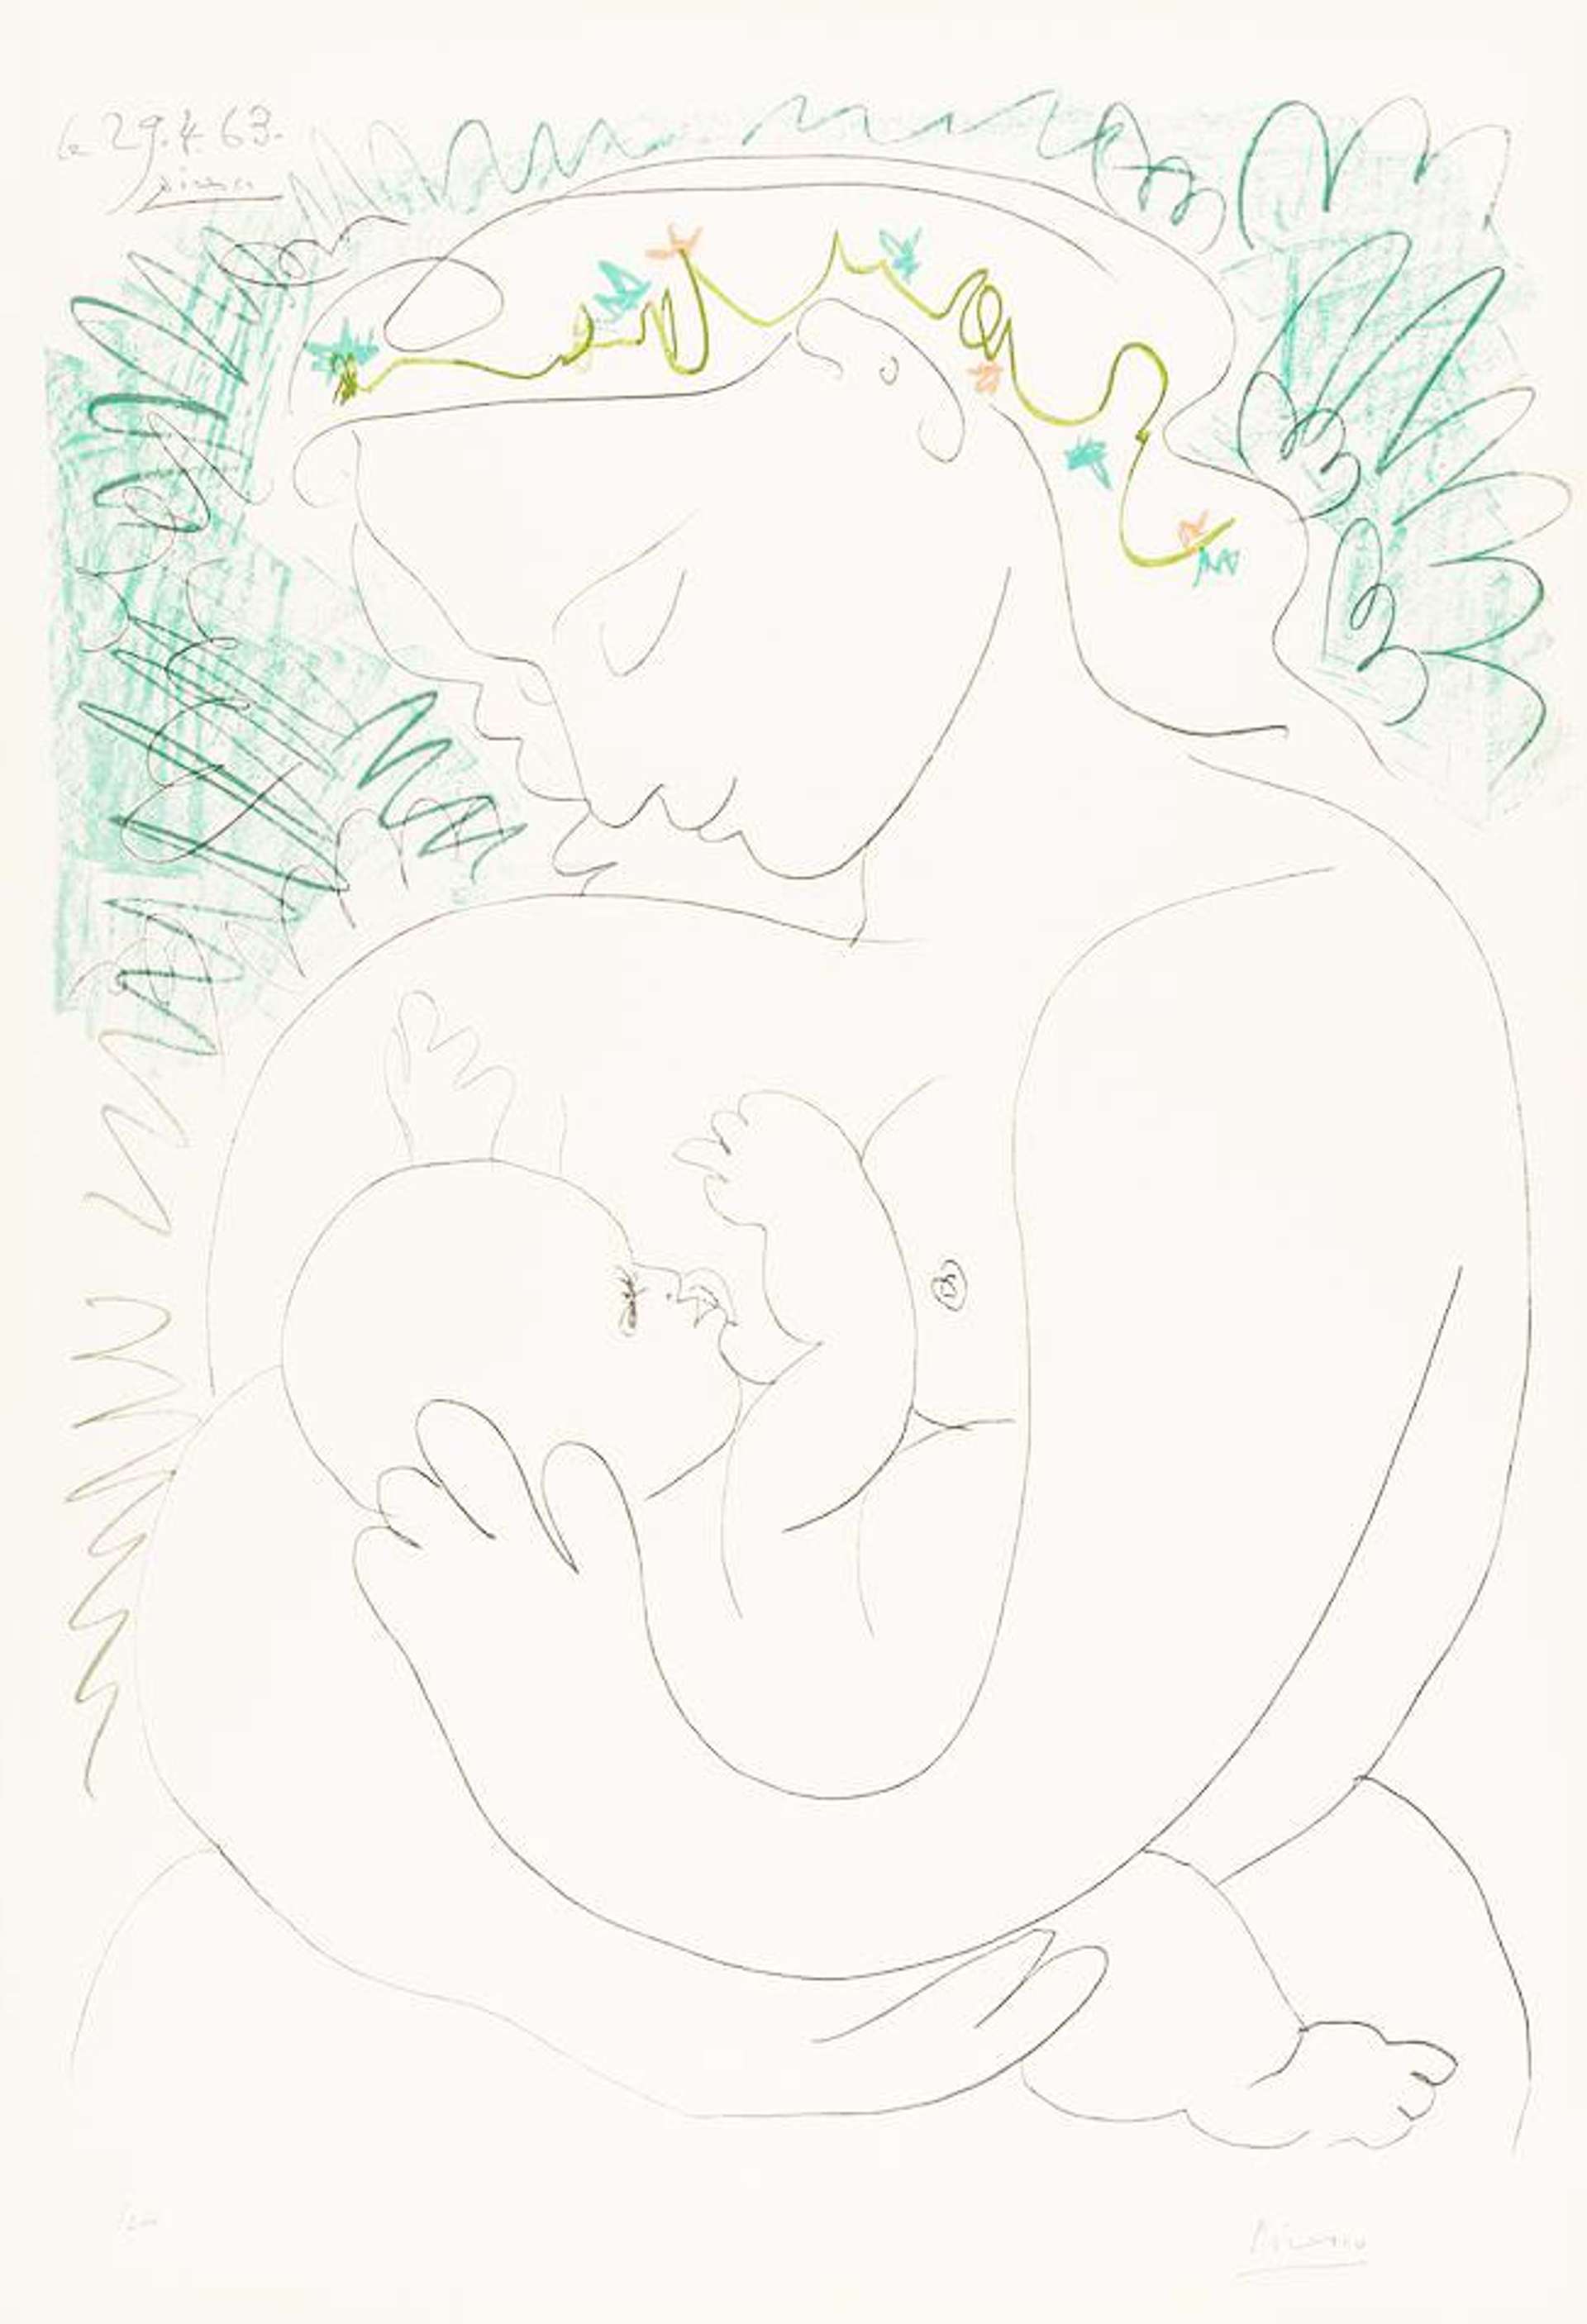 This line drawing shows a mother and young child lovingly embracing, surrounded by green foliage.